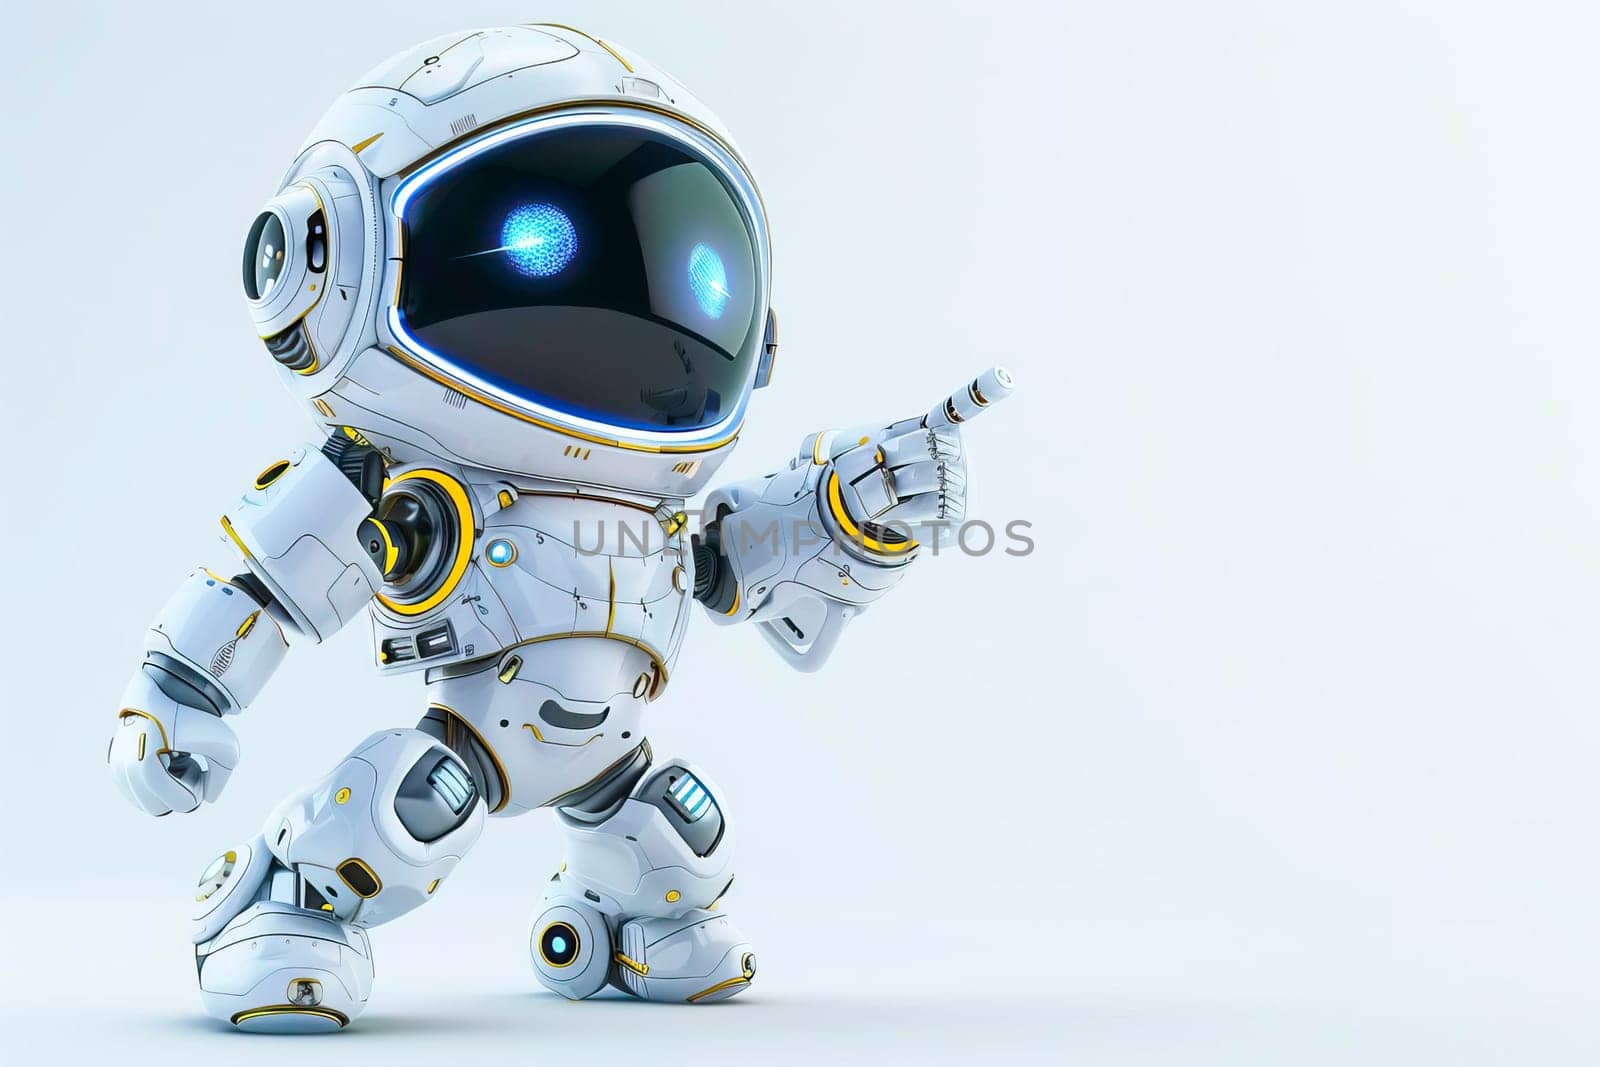 A white robot in action, pointing at something with a sleek design and futuristic appearance.